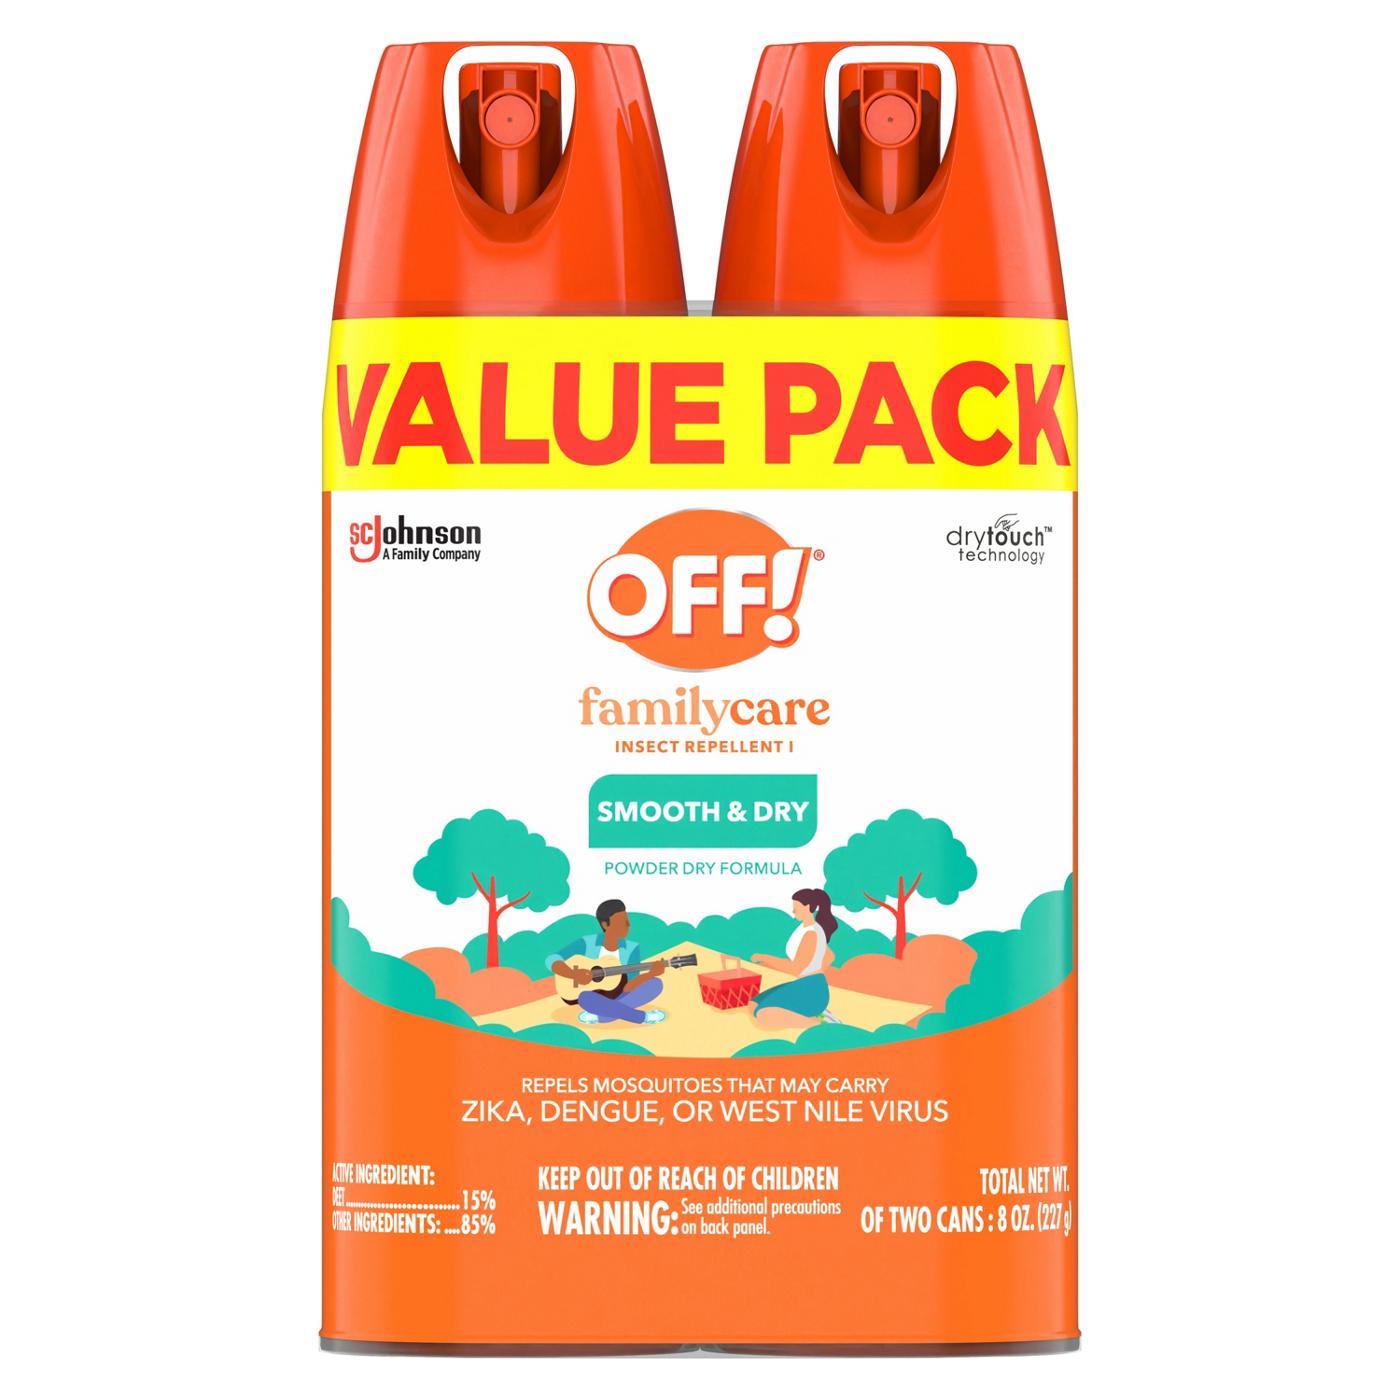 Off! FamilyCare Insect Repellent I, 2 Pk; image 1 of 2